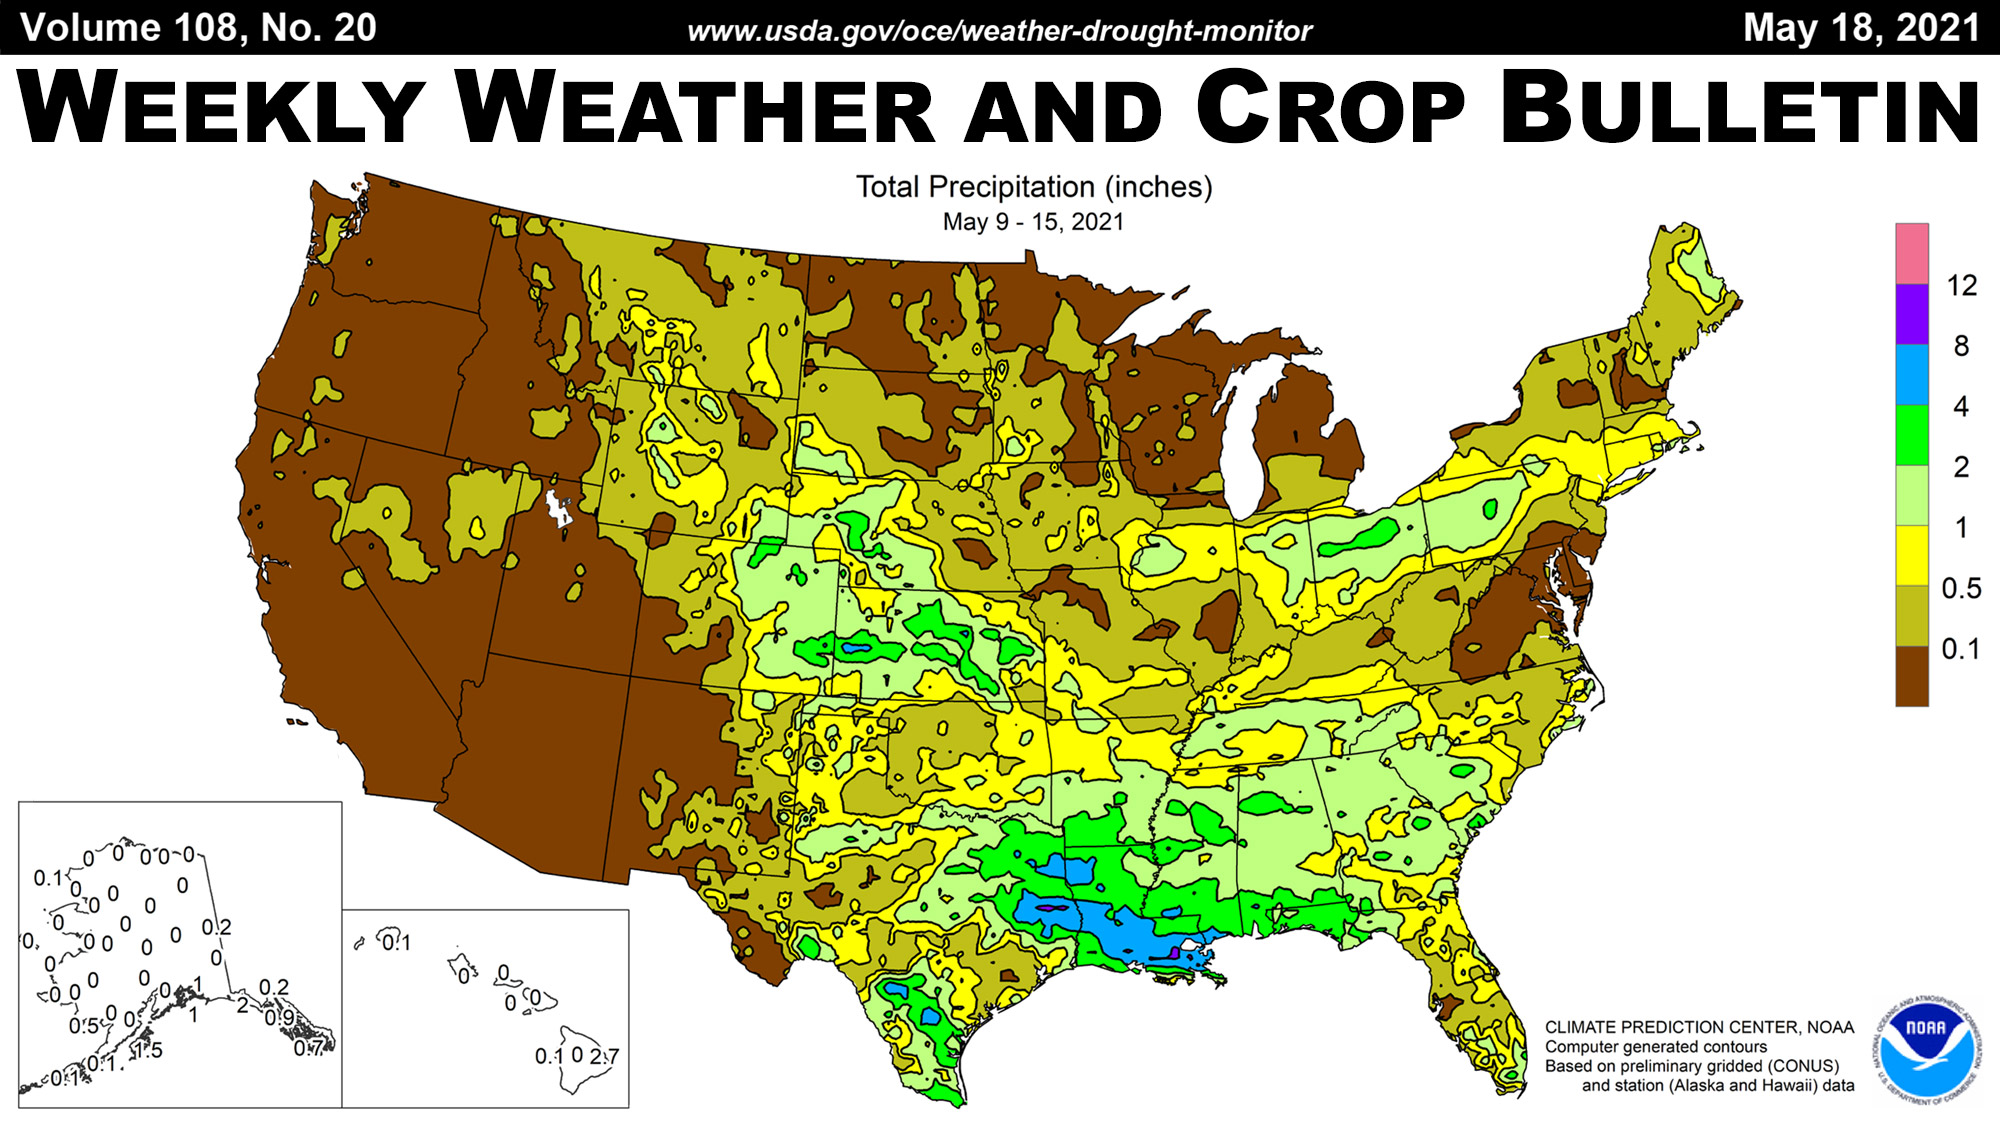 Recent Conditions for Crops - Weekly Publication